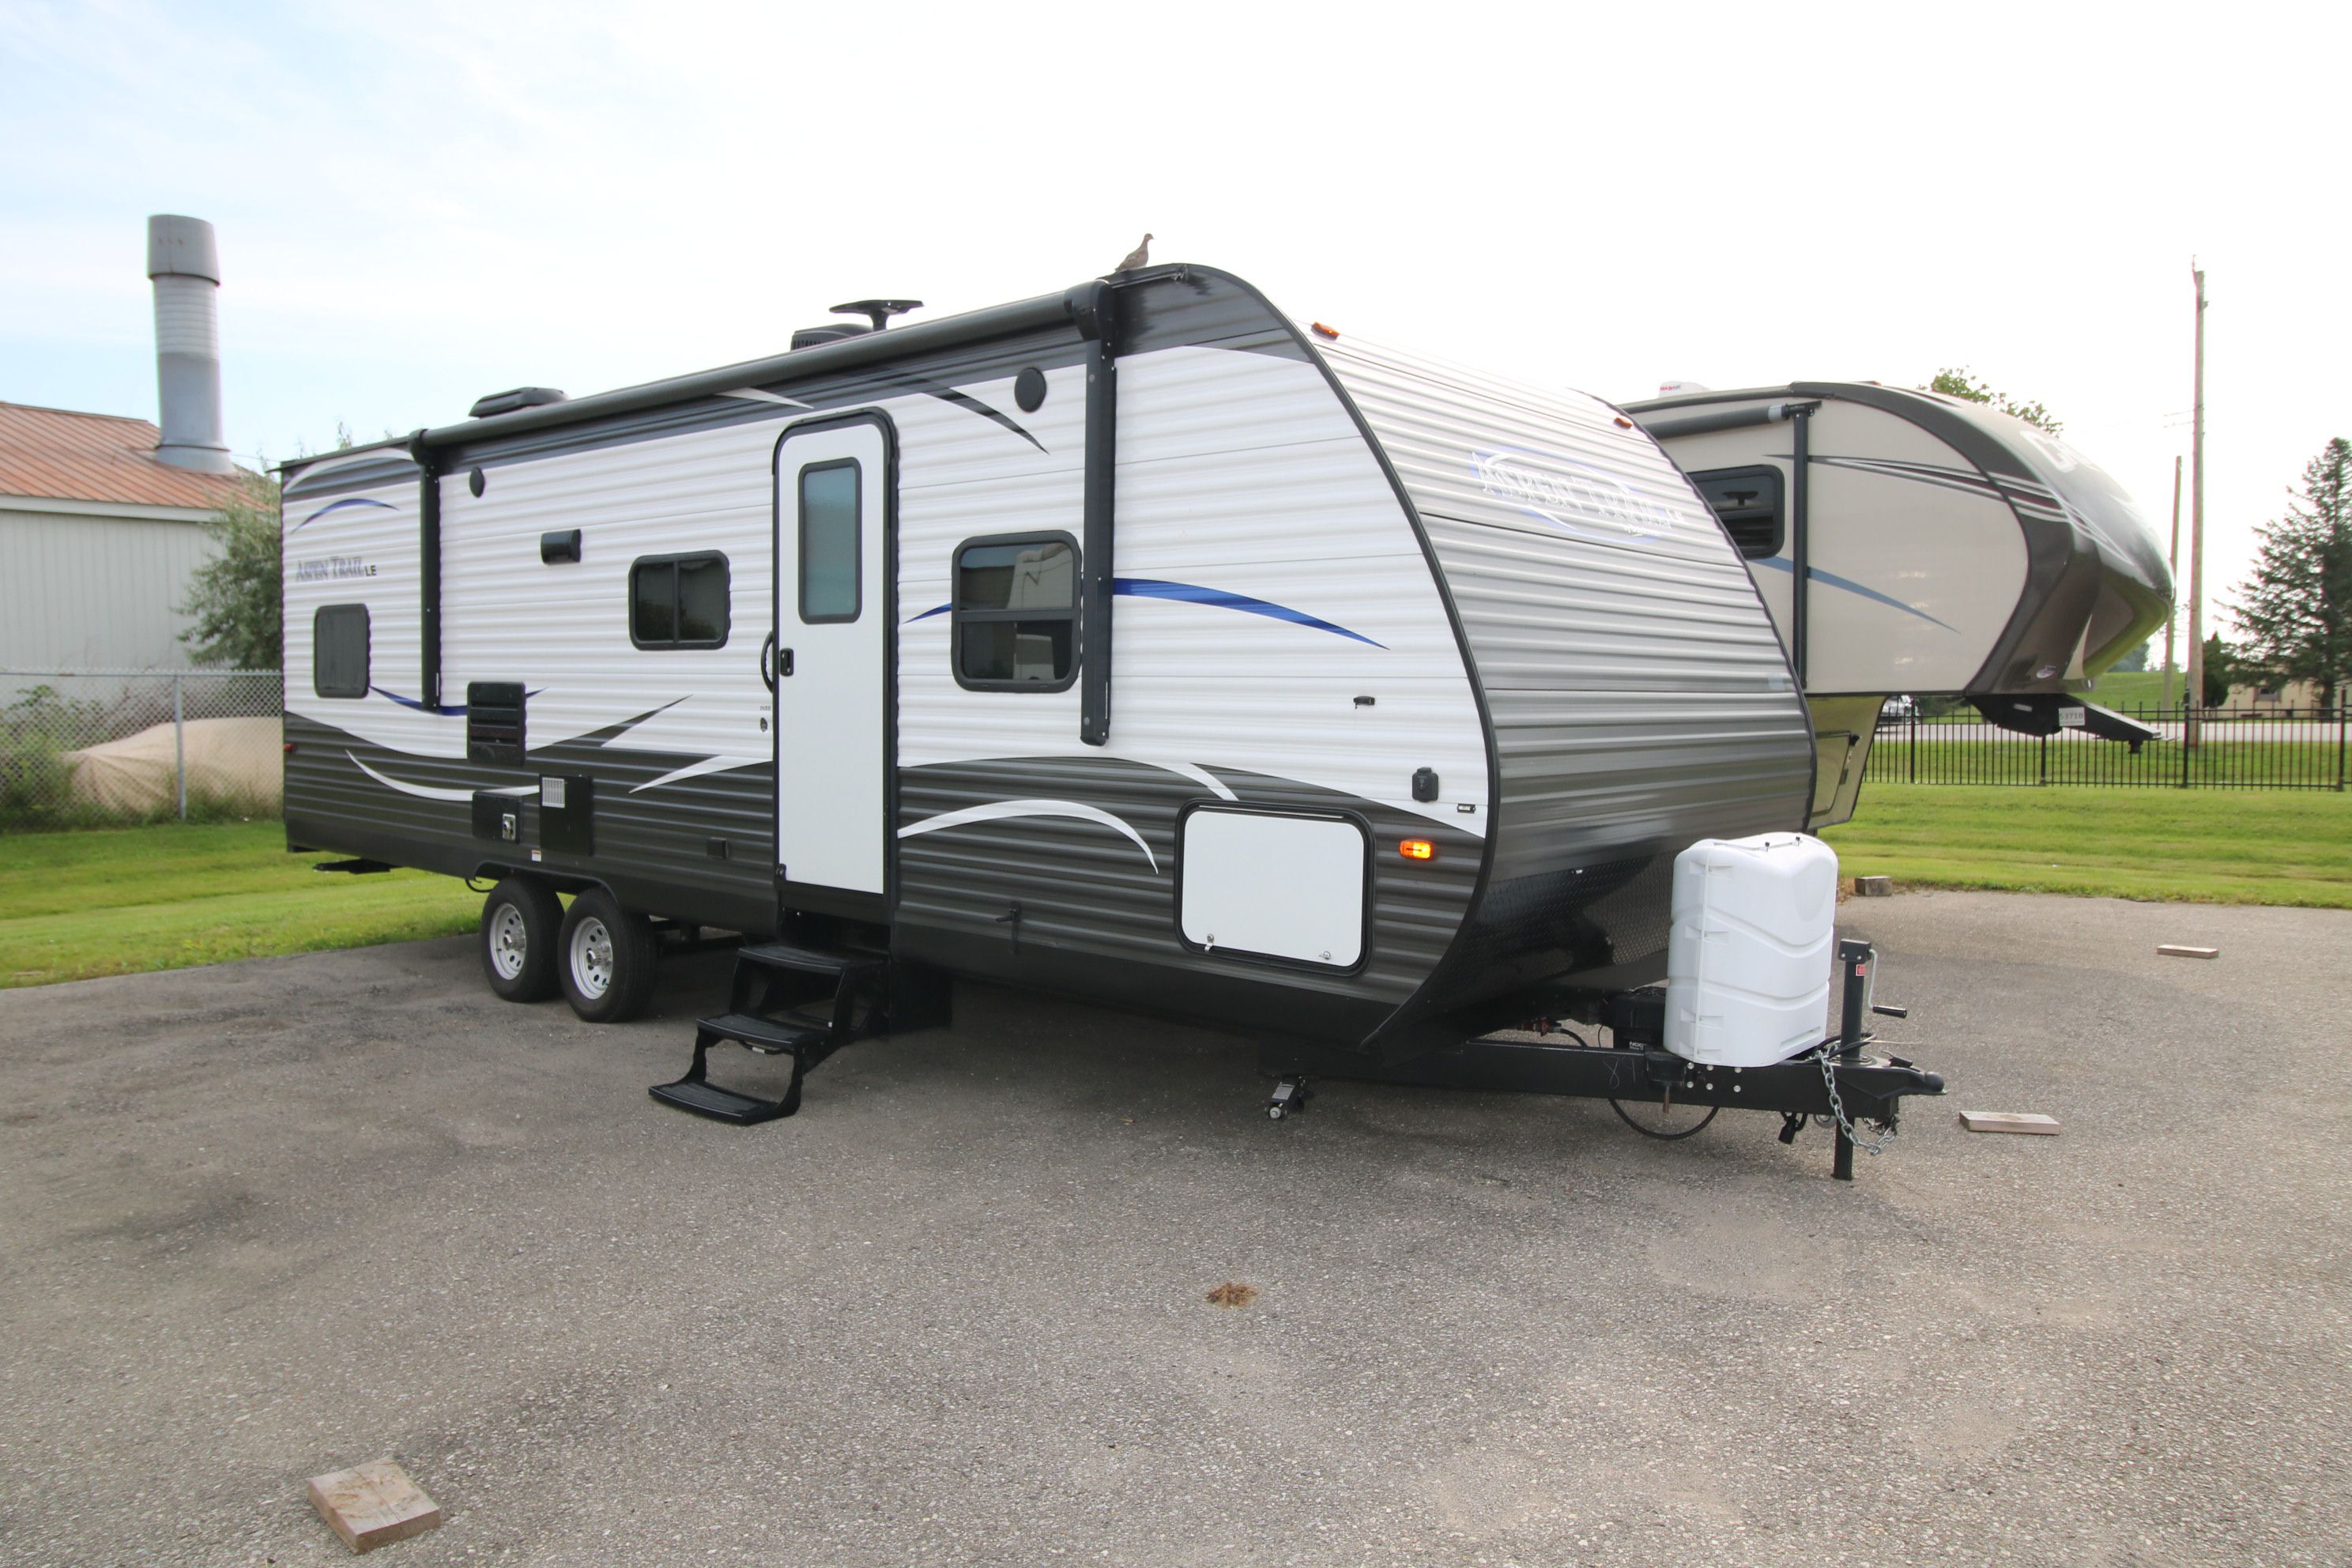 camping travel trailer for sale